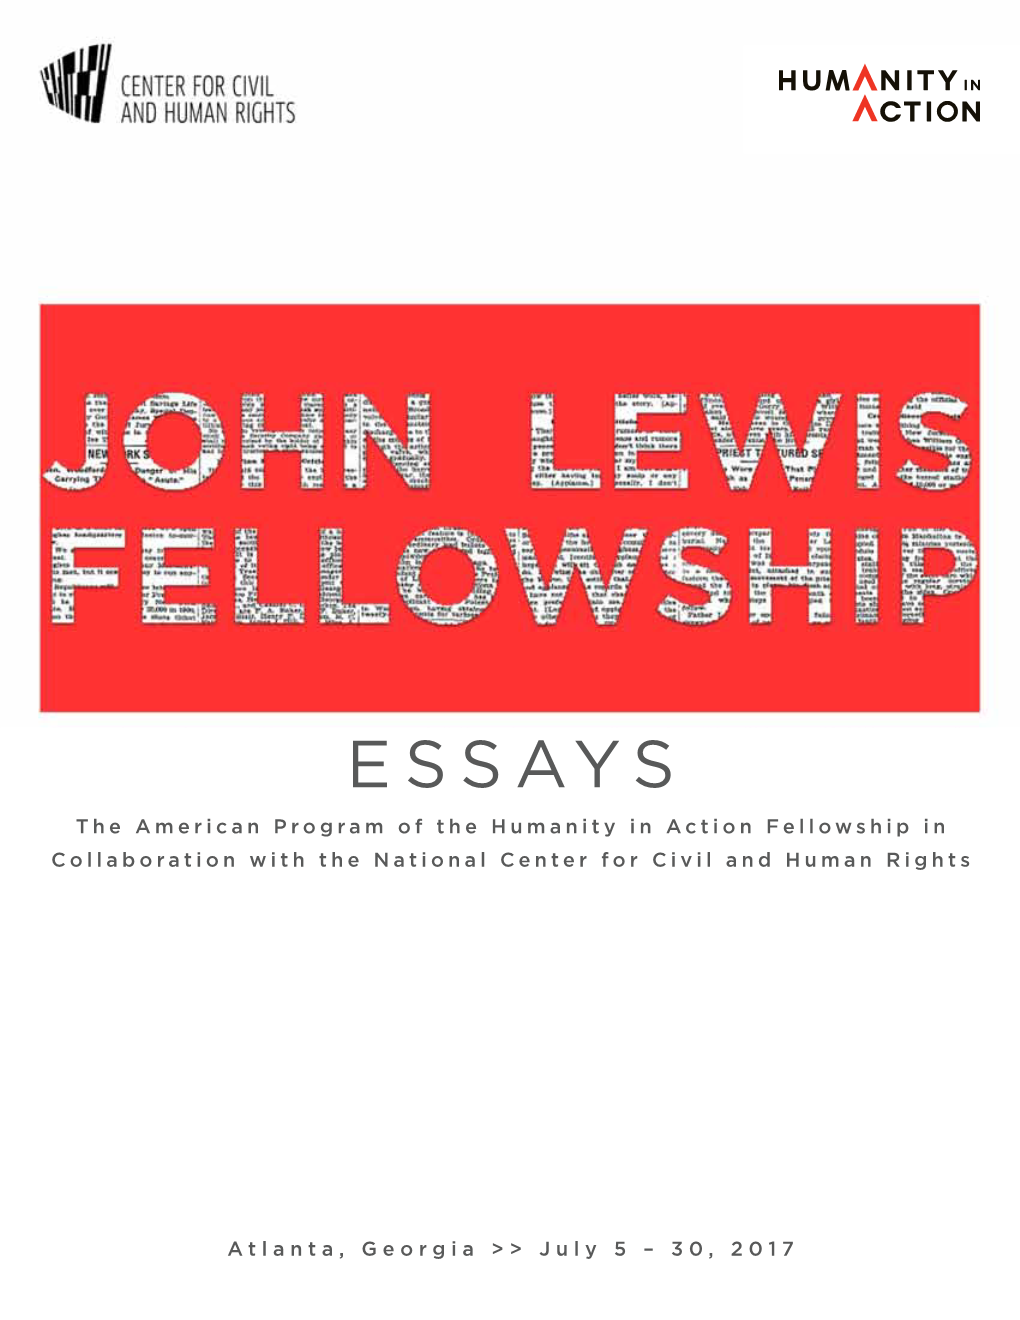 ESSAYS the American Program of the Humanity in Action Fellowship in Collaboration with the National Center for Civil and Human Rights